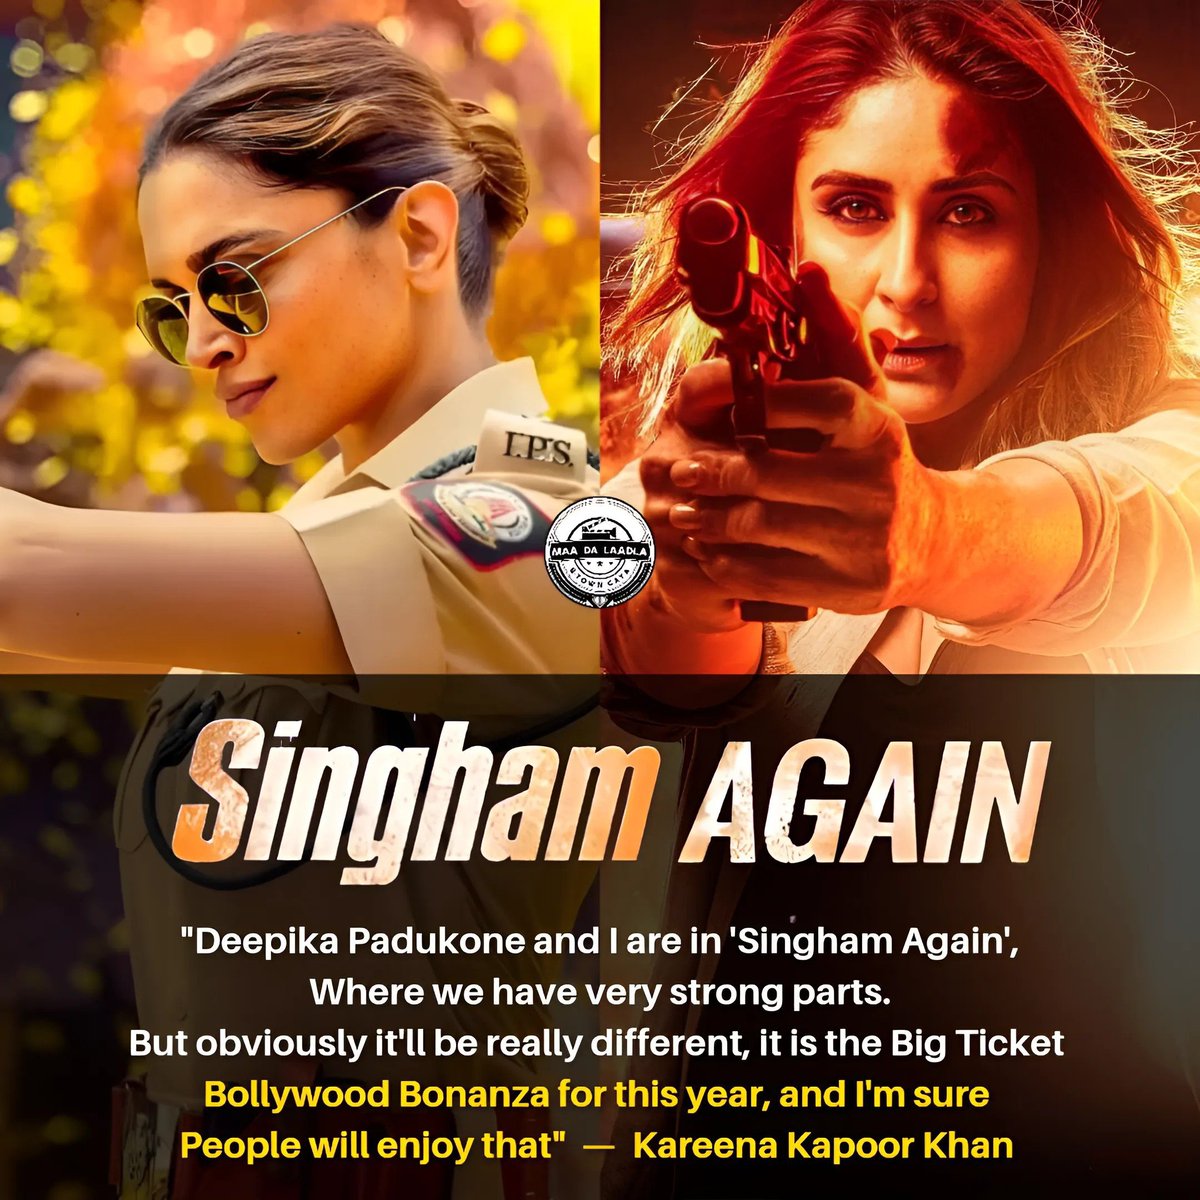 '#DeepikaPadukone and I  are in #SinghamAgain, where we have very strong parts. But obviously it’ll be really different, it is the big ticket #Bollywood bonanza for this year, and I’m sure people will enjoy that' says #KareenaKapoorKhan 🔥🔥🔥

#Singham3 #KareenaKapoor #AjayDevgn